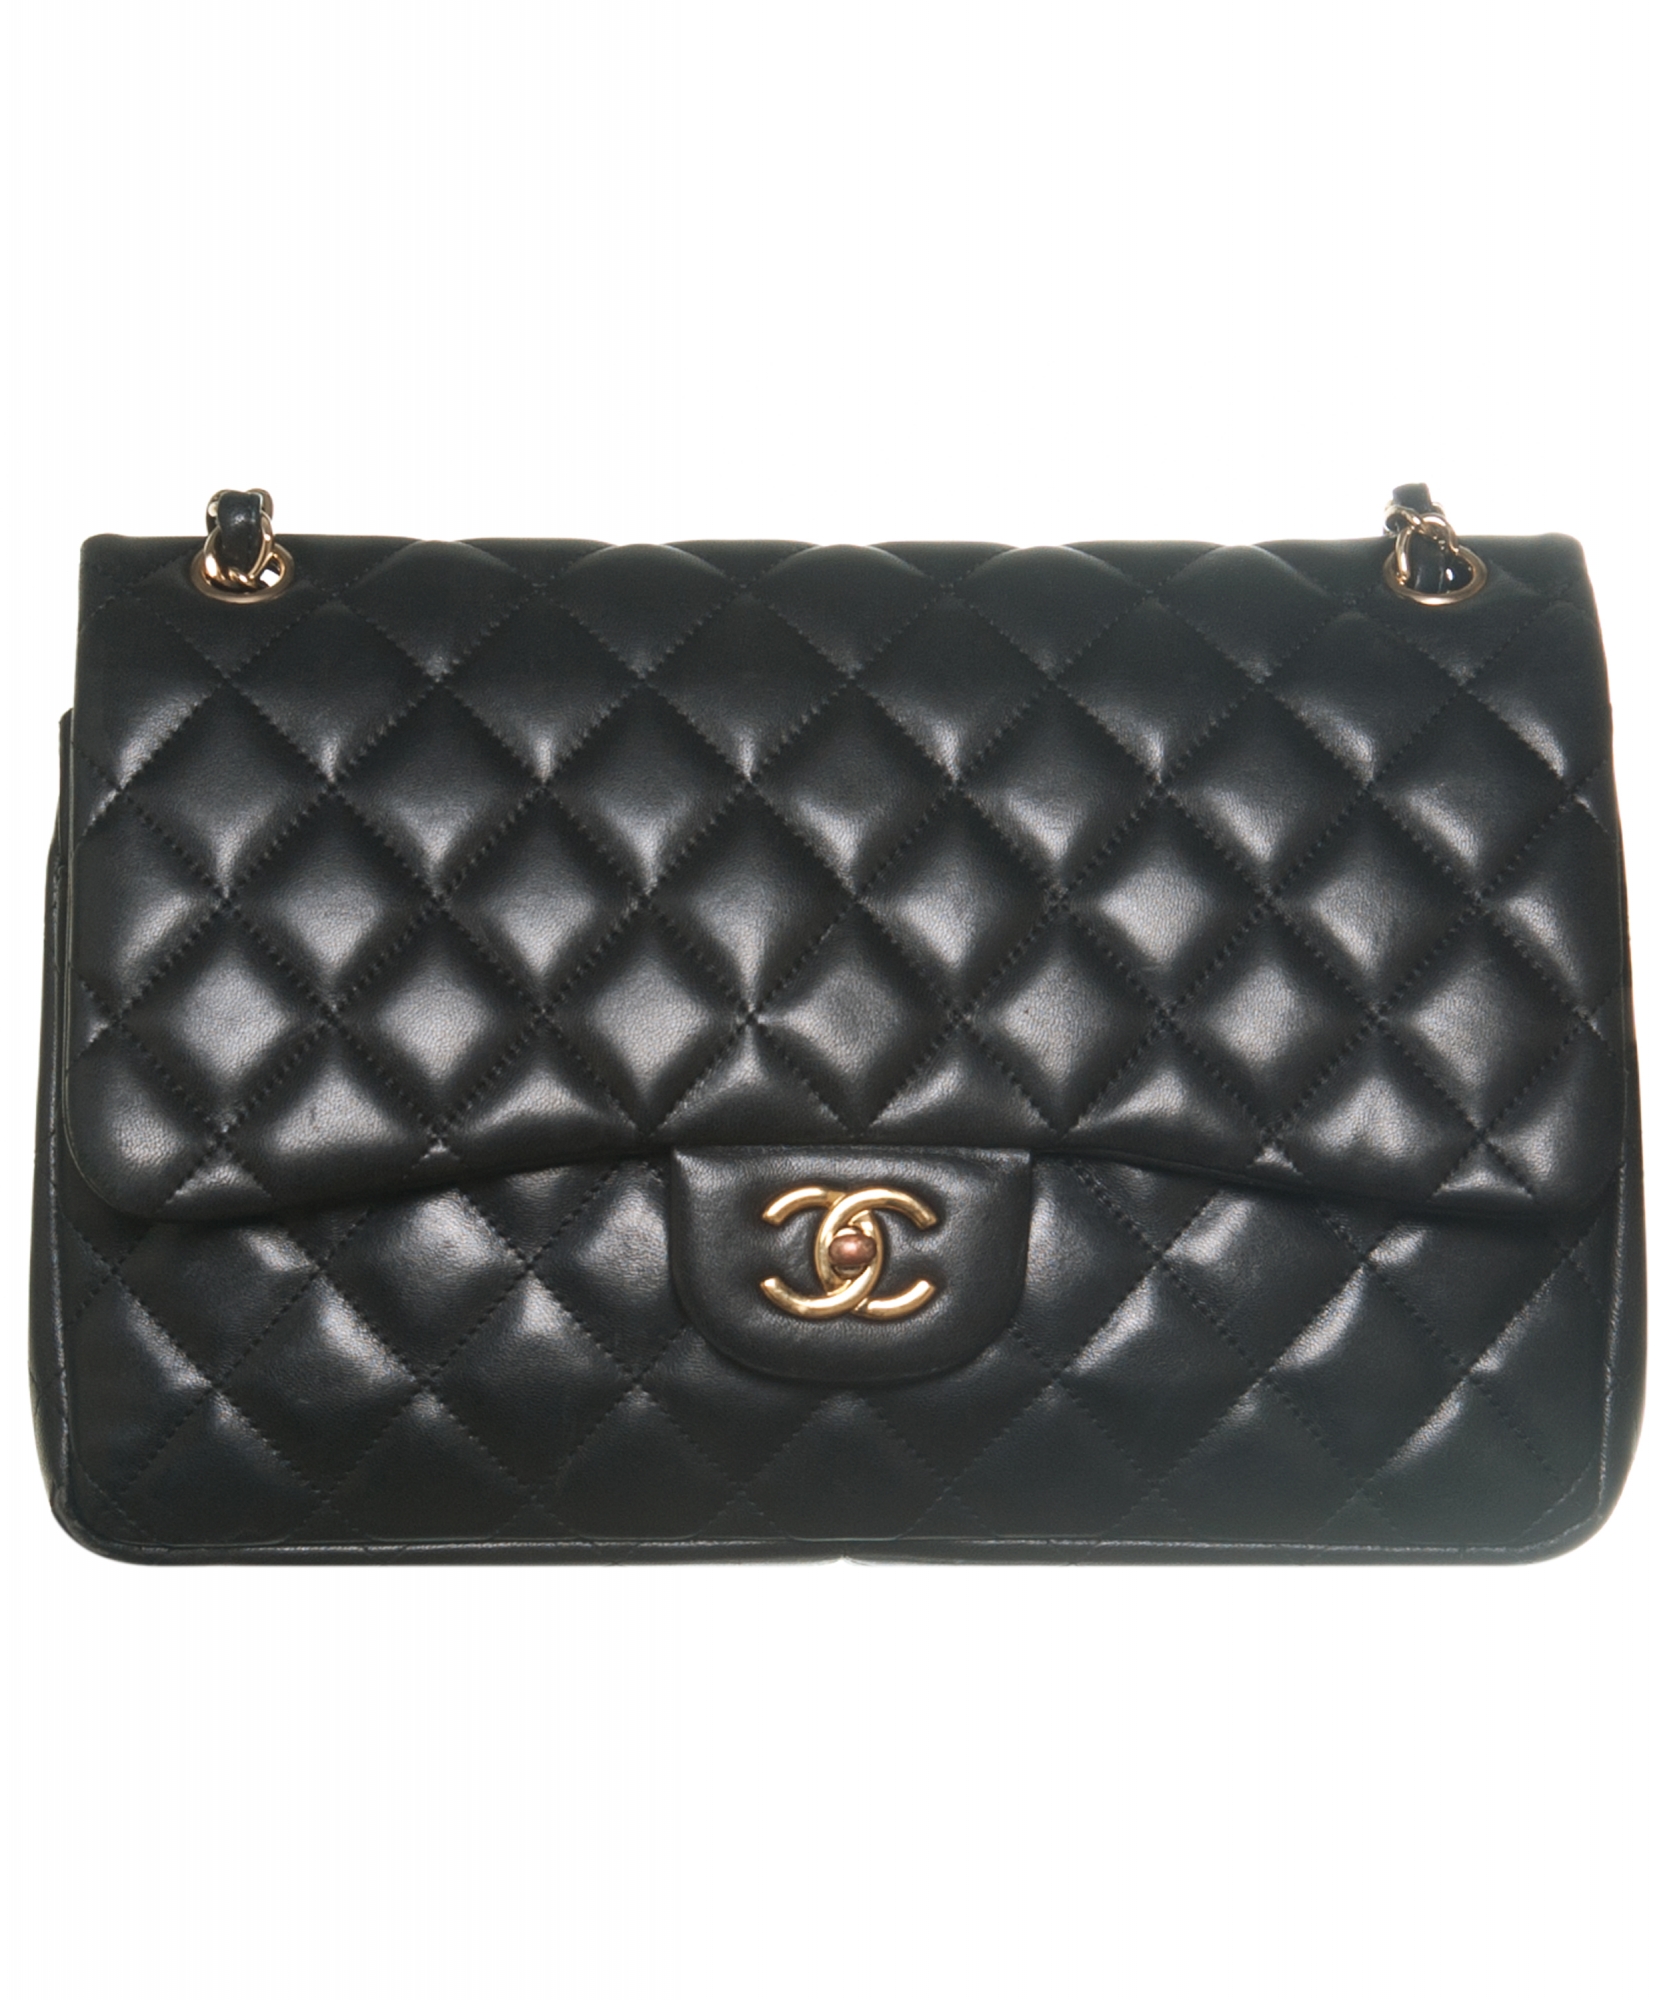 Chanel Black Quilted Lambskin Leather Classic Double Jumbo Flap Bag ...